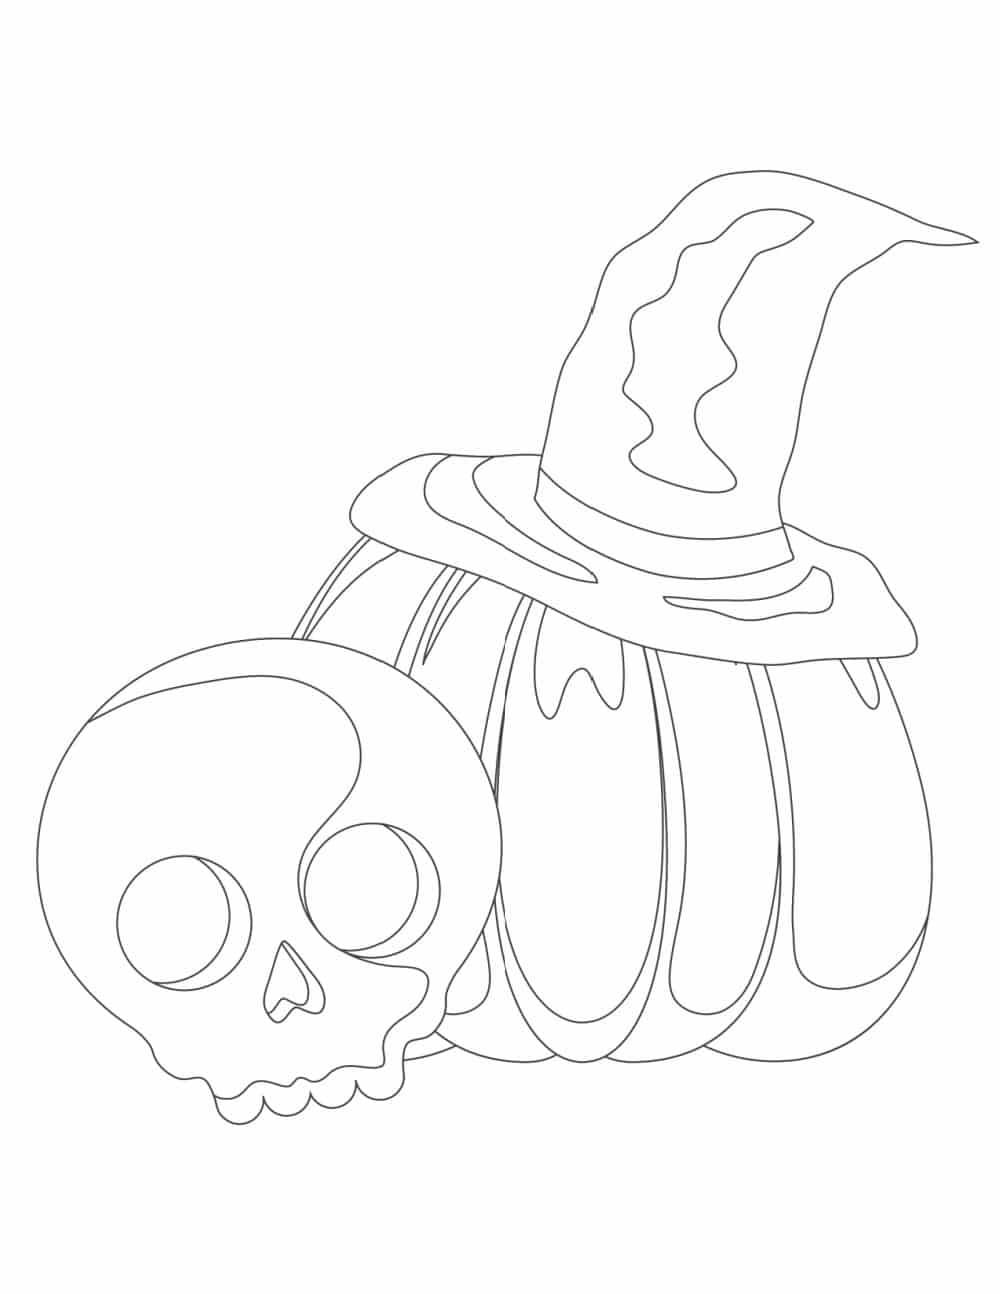 Free easy halloween coloring pages for kids